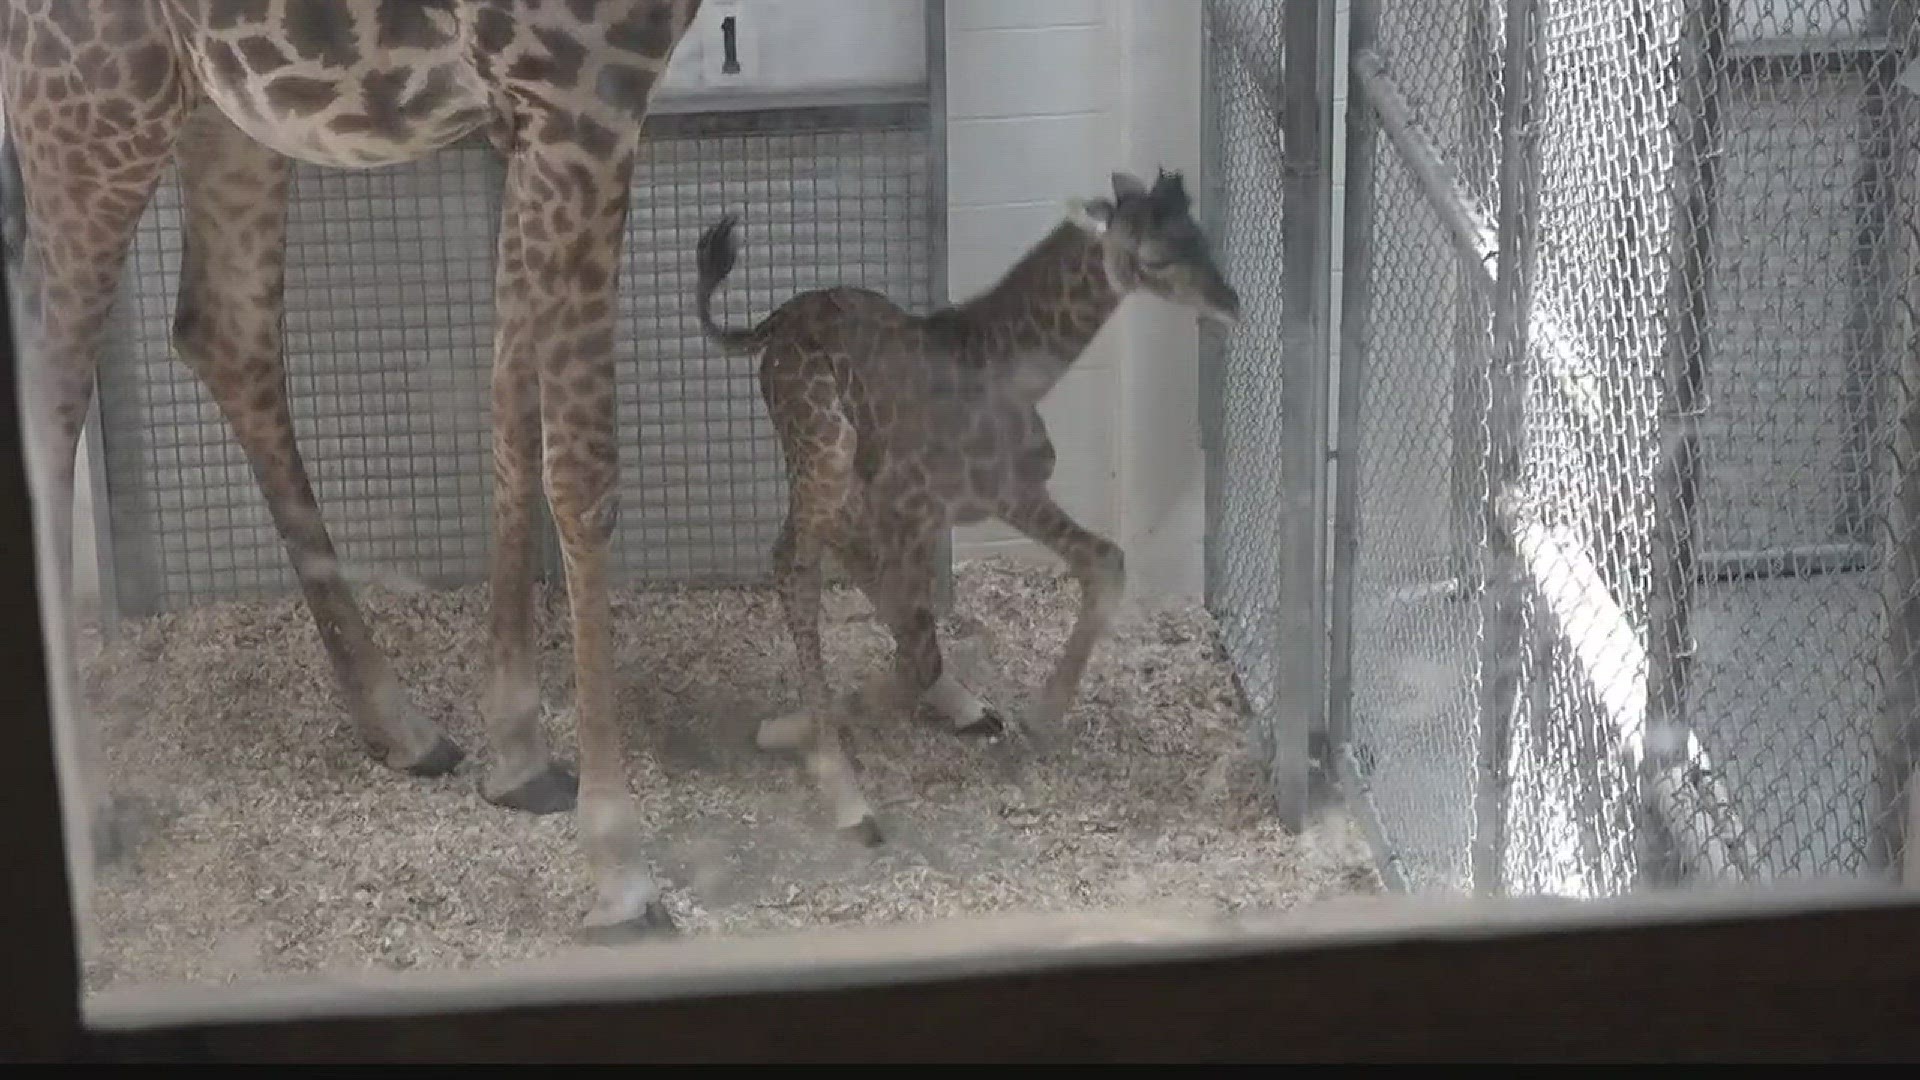 13News Now Jemie Lee got an exclusive look at the 2-day-old baby giraffe at the Virginia Zoo.